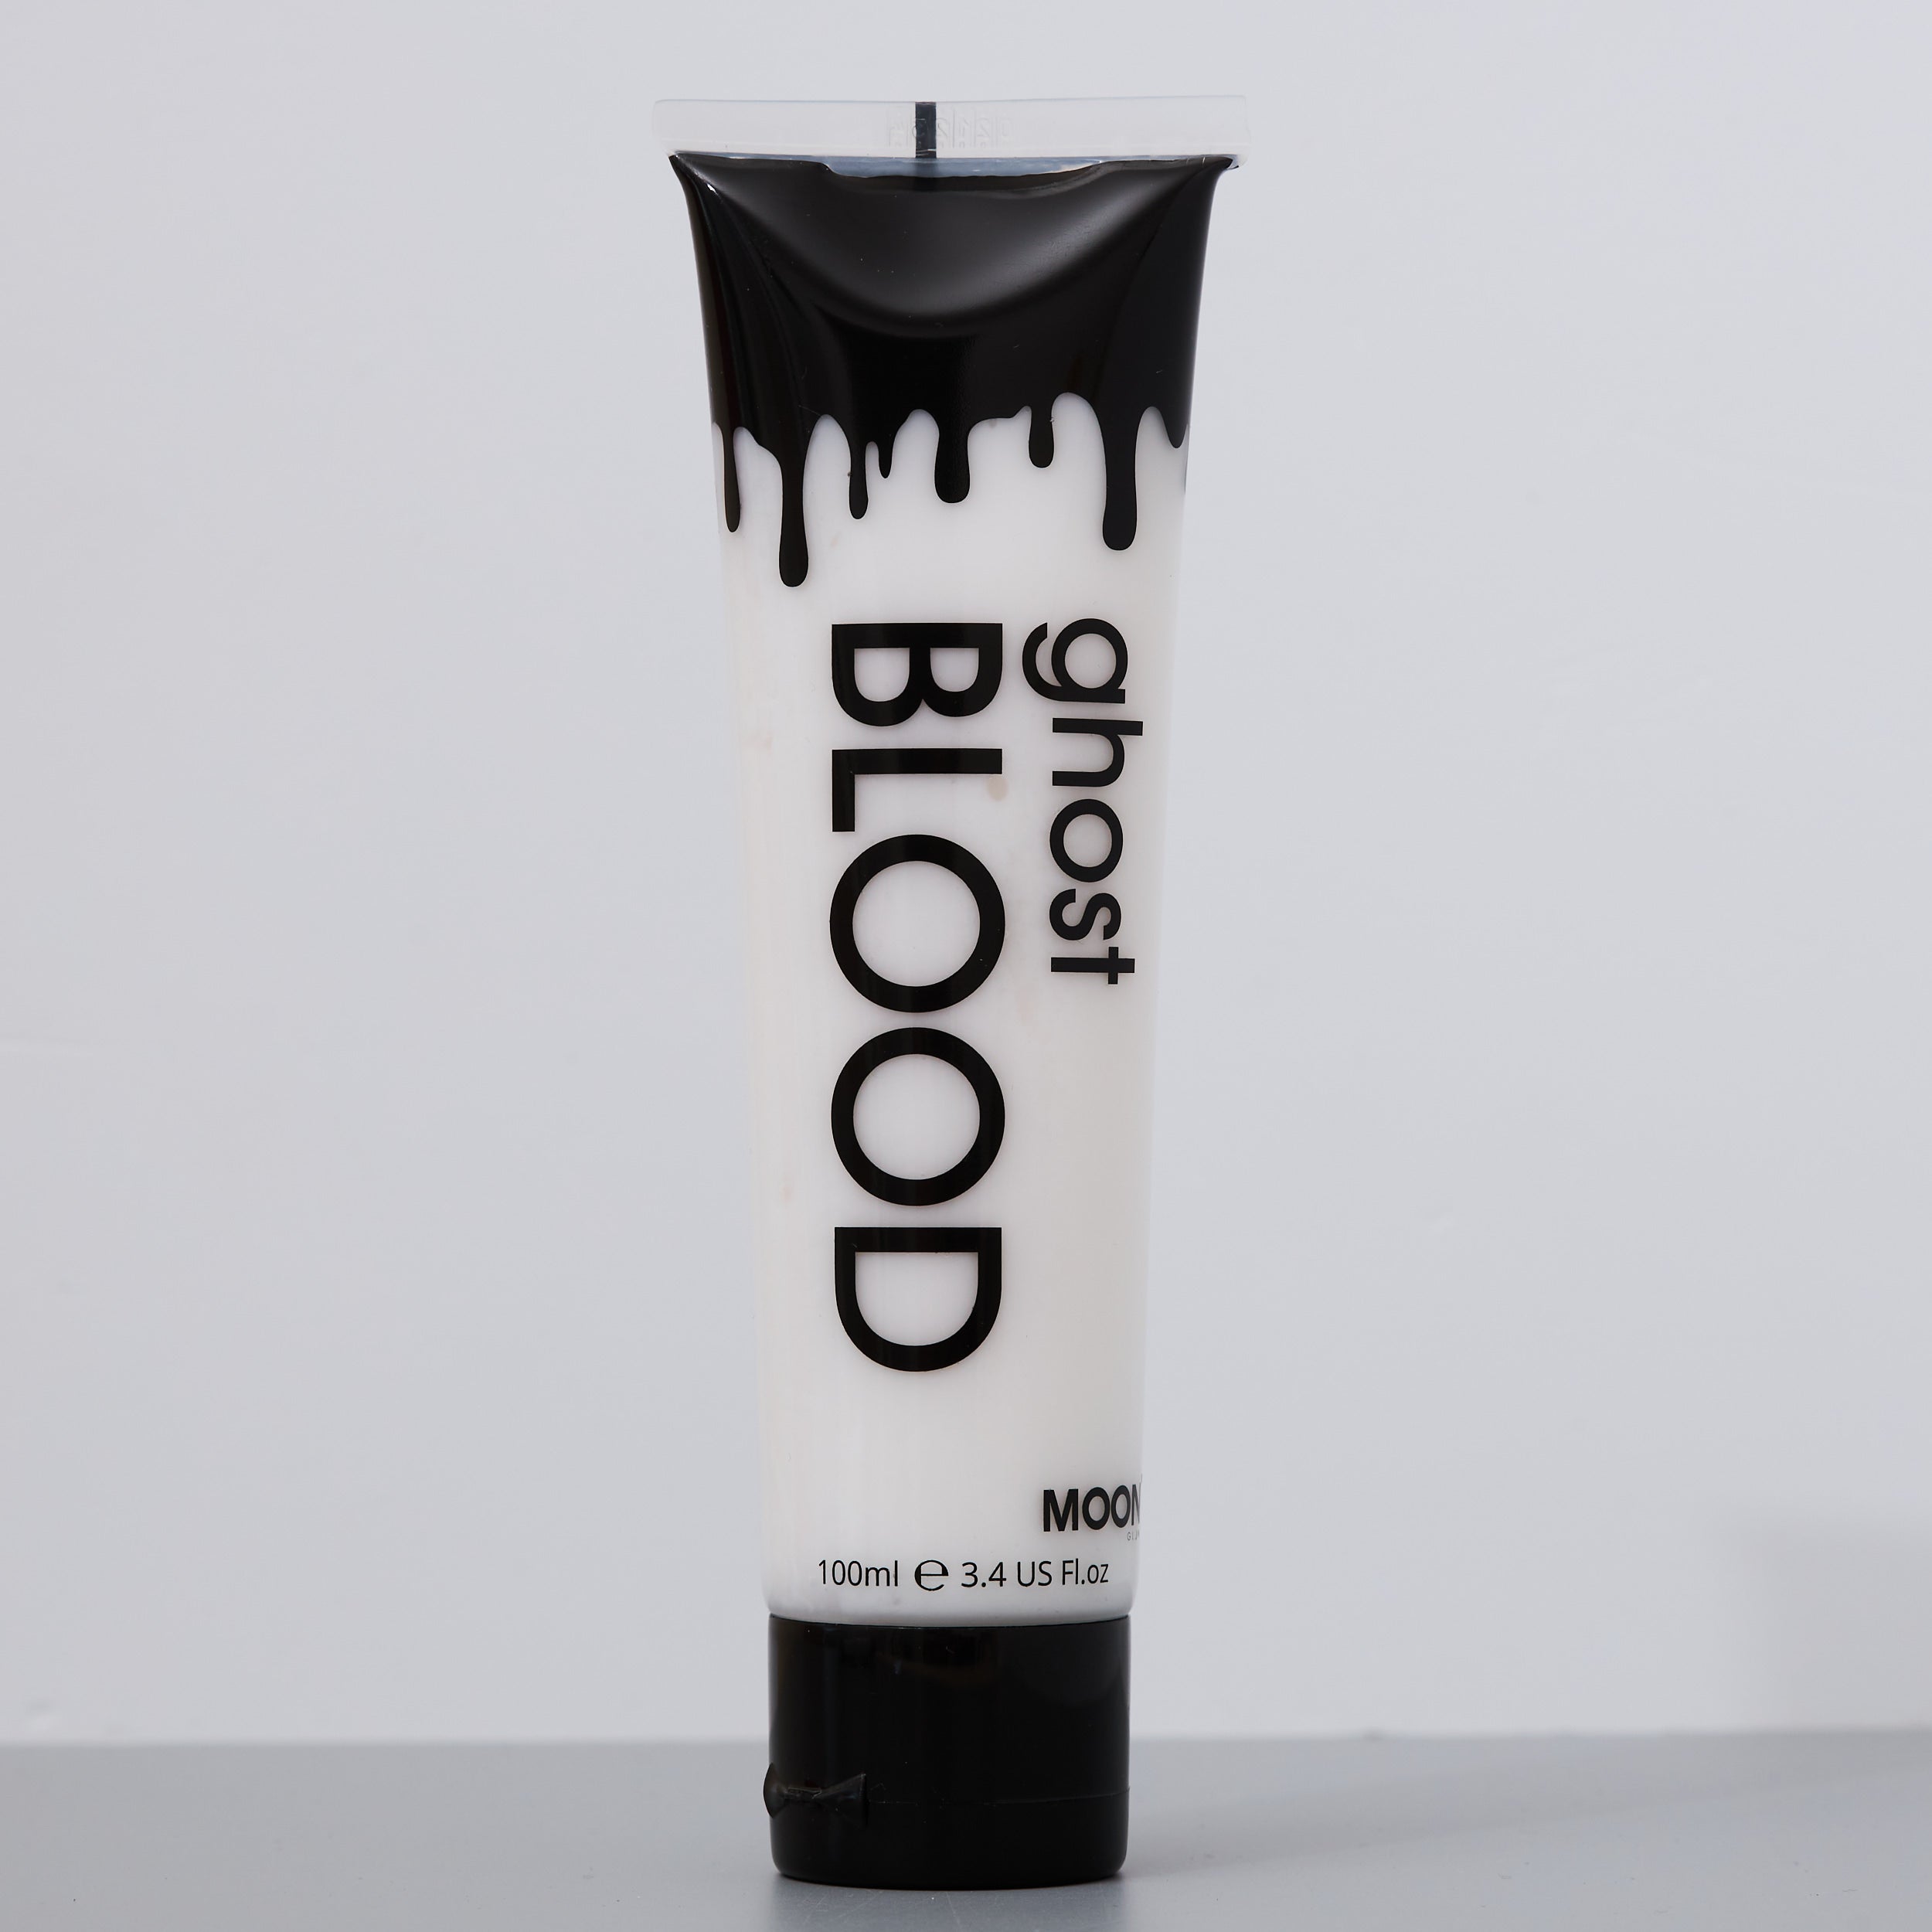 Ghost Blood  - Terror, 100mL. Cosmetically certified, FDA & Health Canada compliant, cruelty free and vegan.